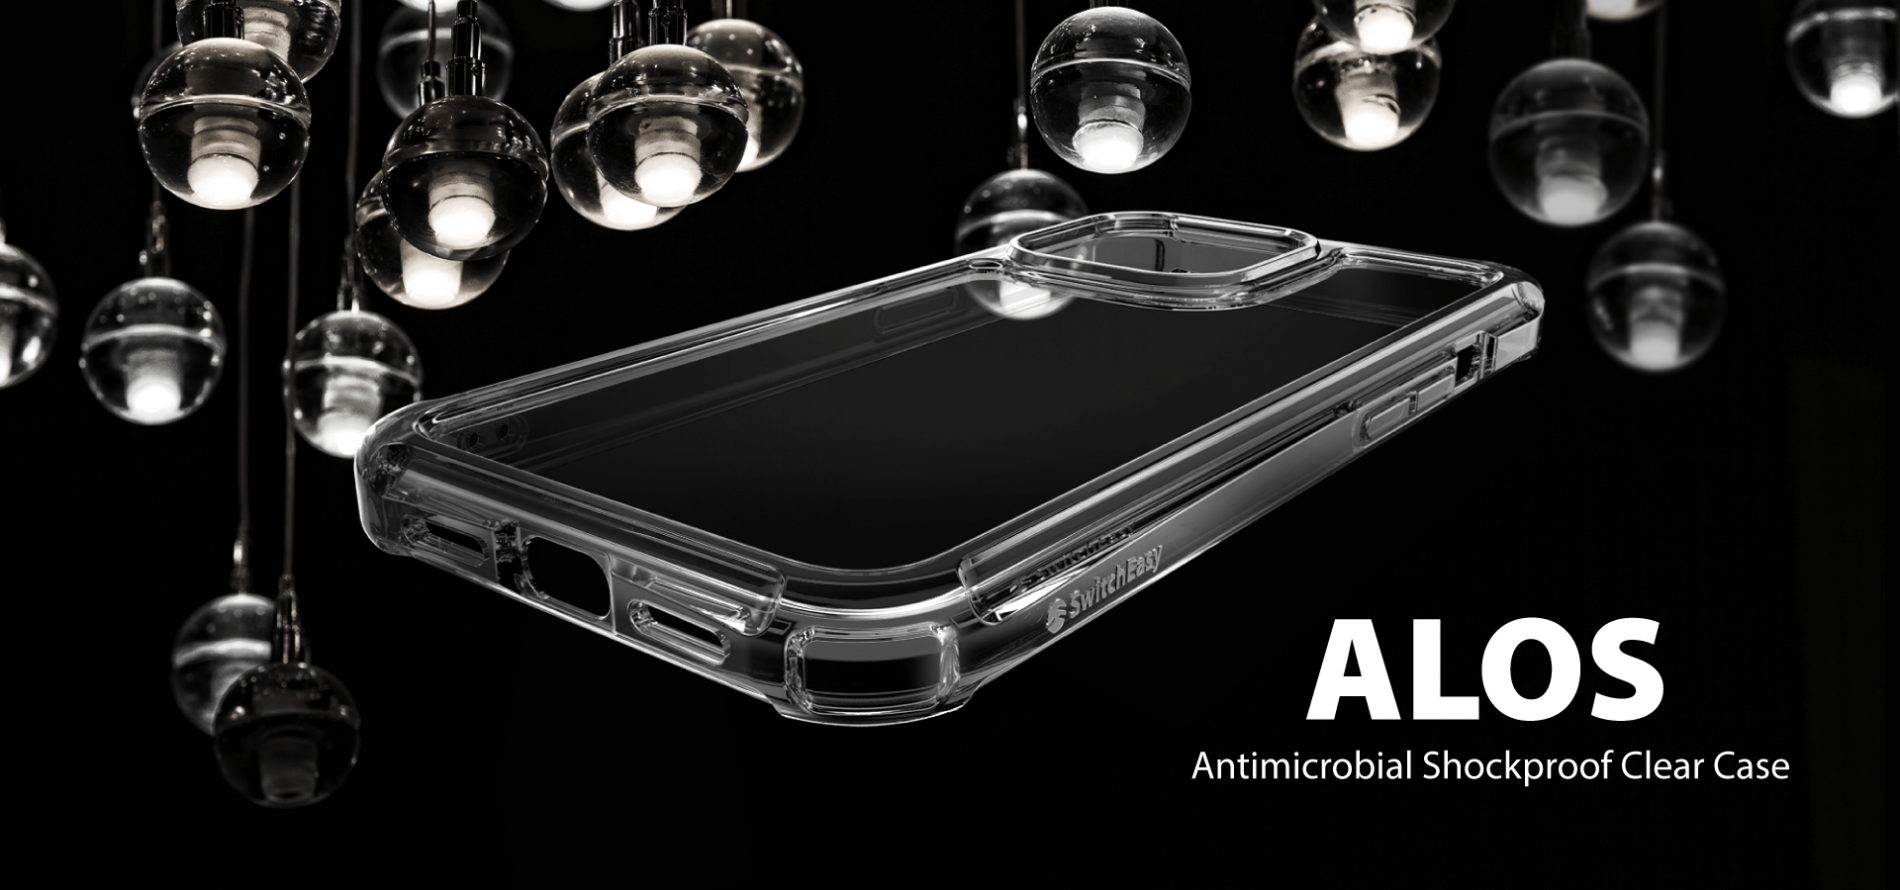 switcheasy_alos_anti_microbial_shockproof_clear_case